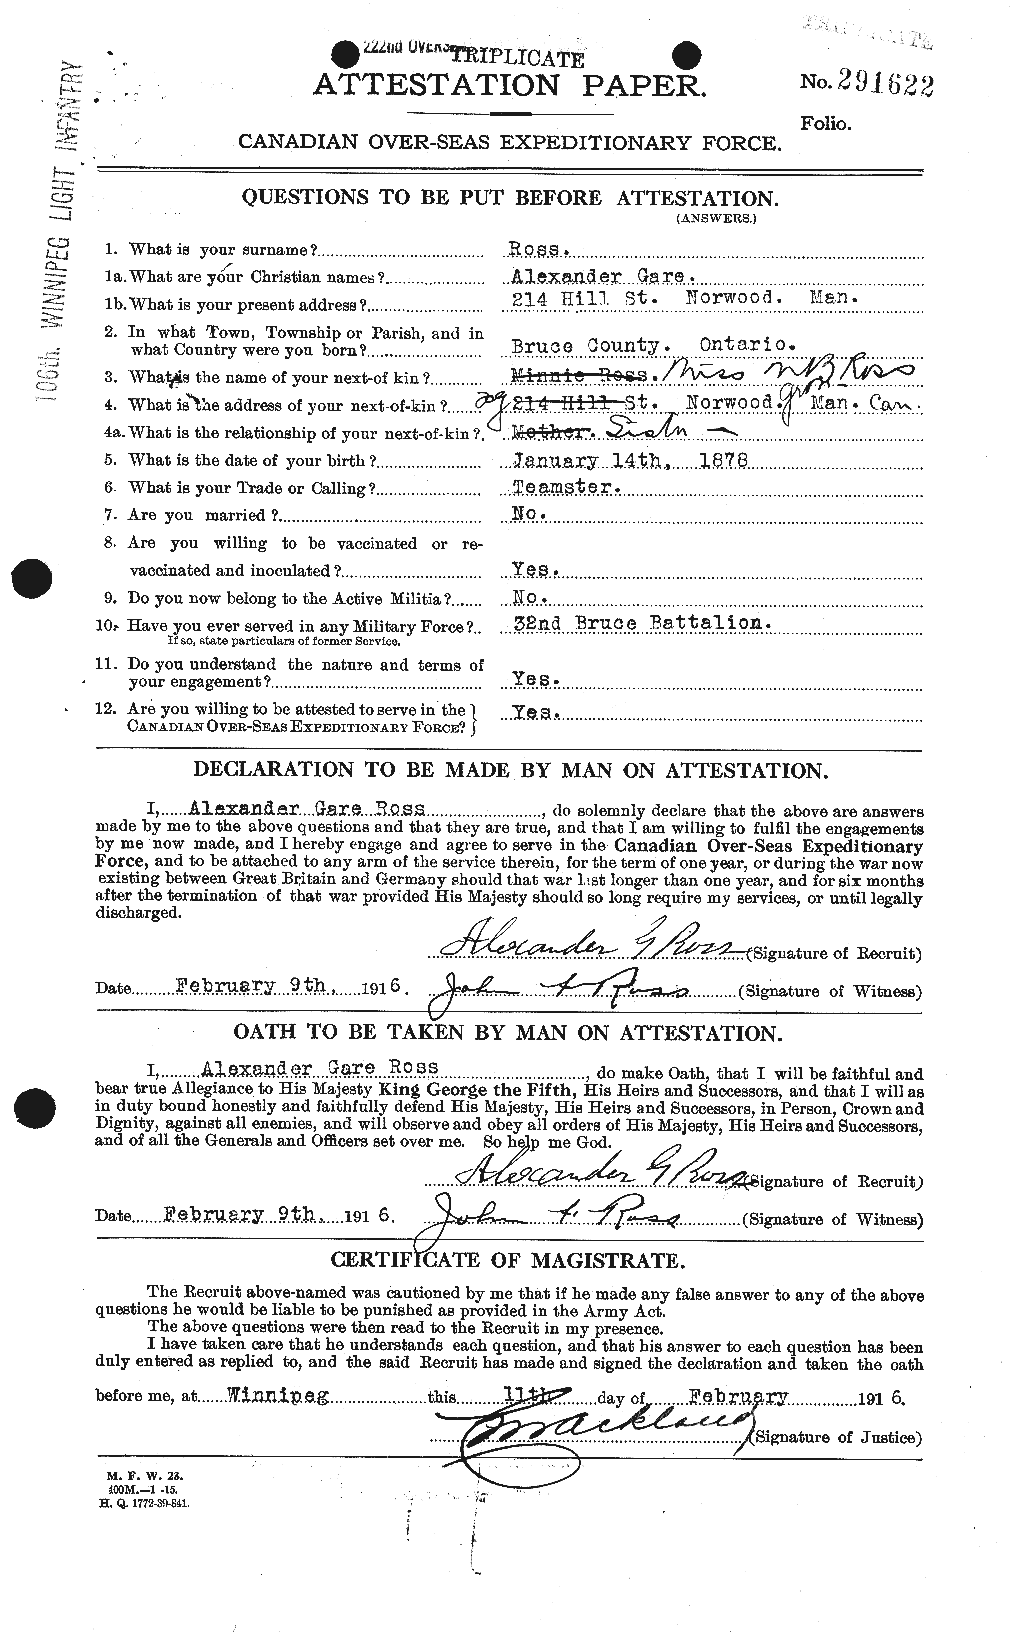 Personnel Records of the First World War - CEF 611400a